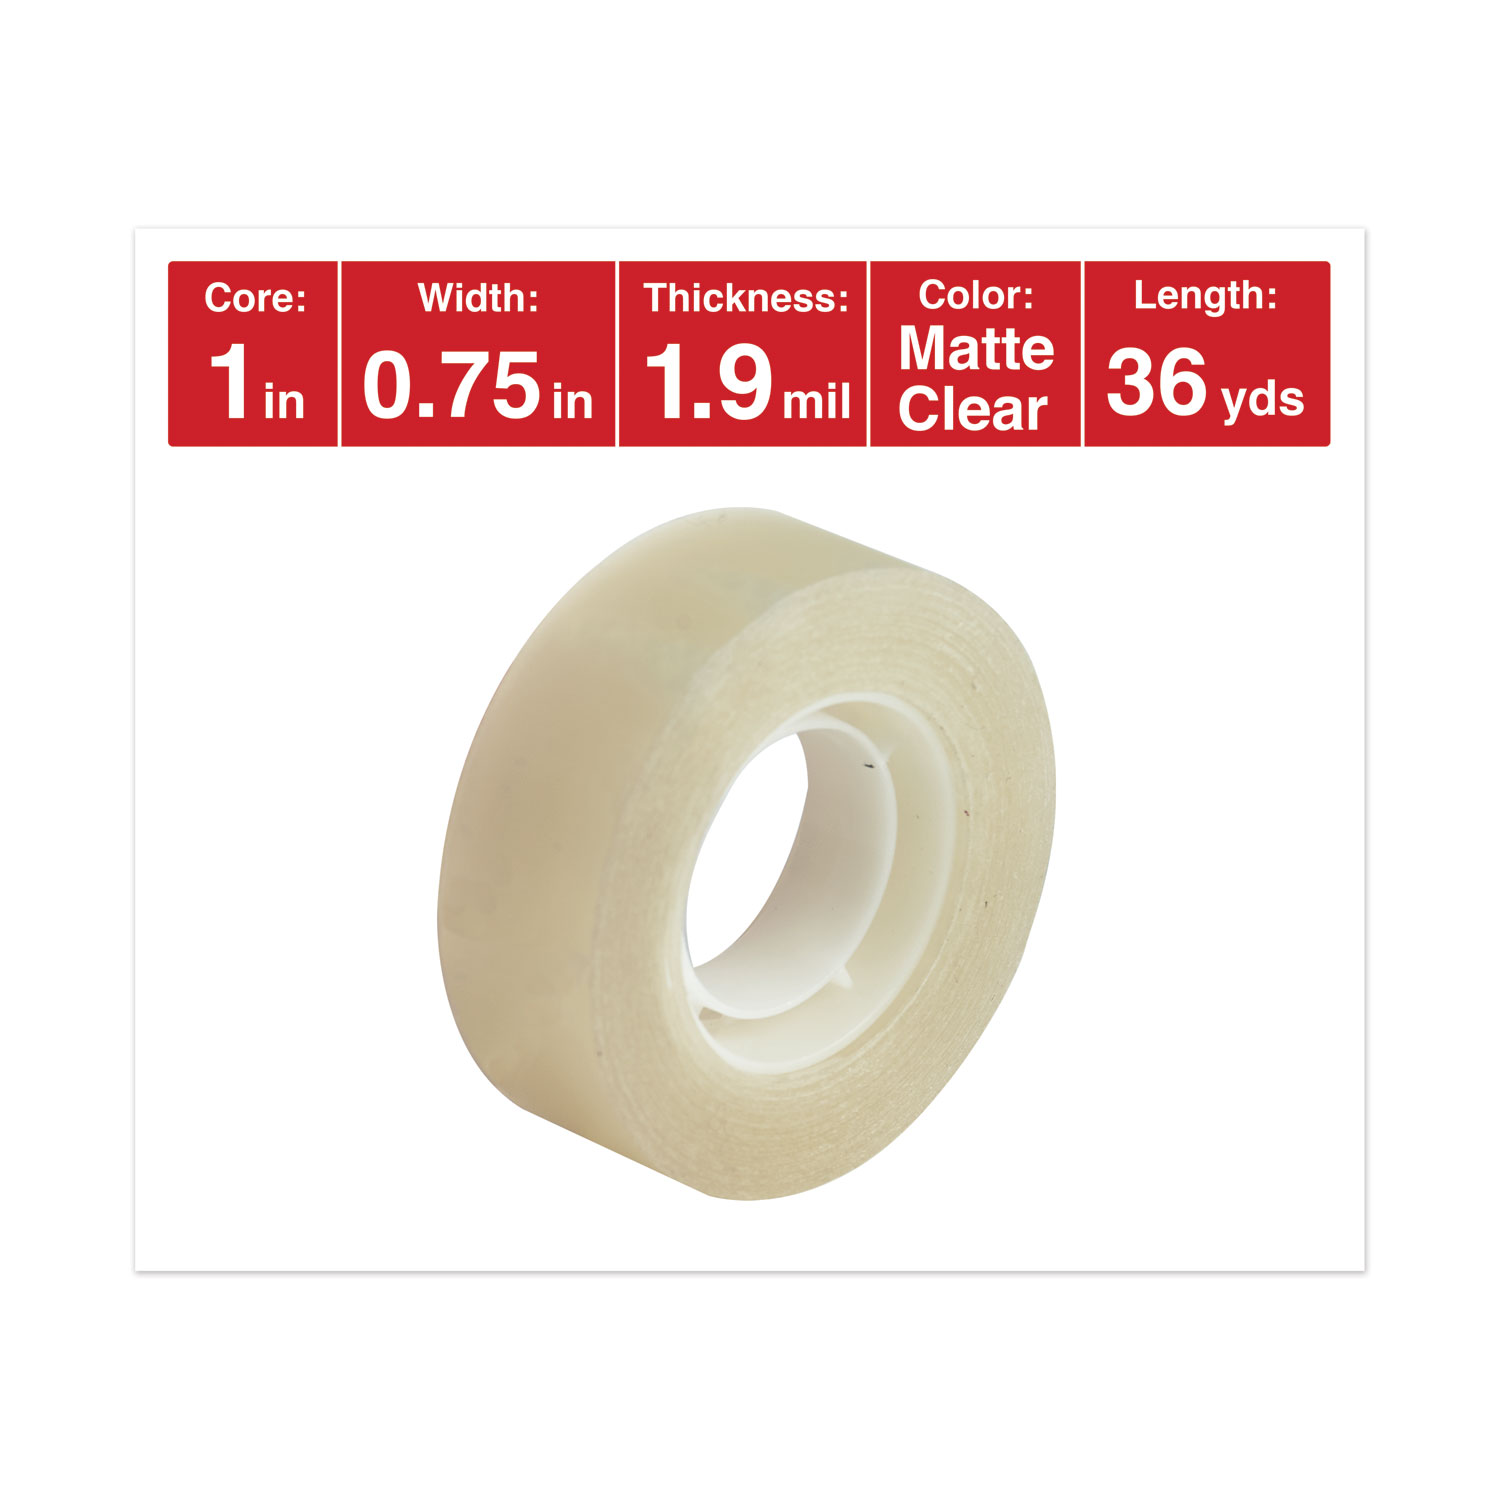 Winc Invisible Tape 18mmx33m Roll